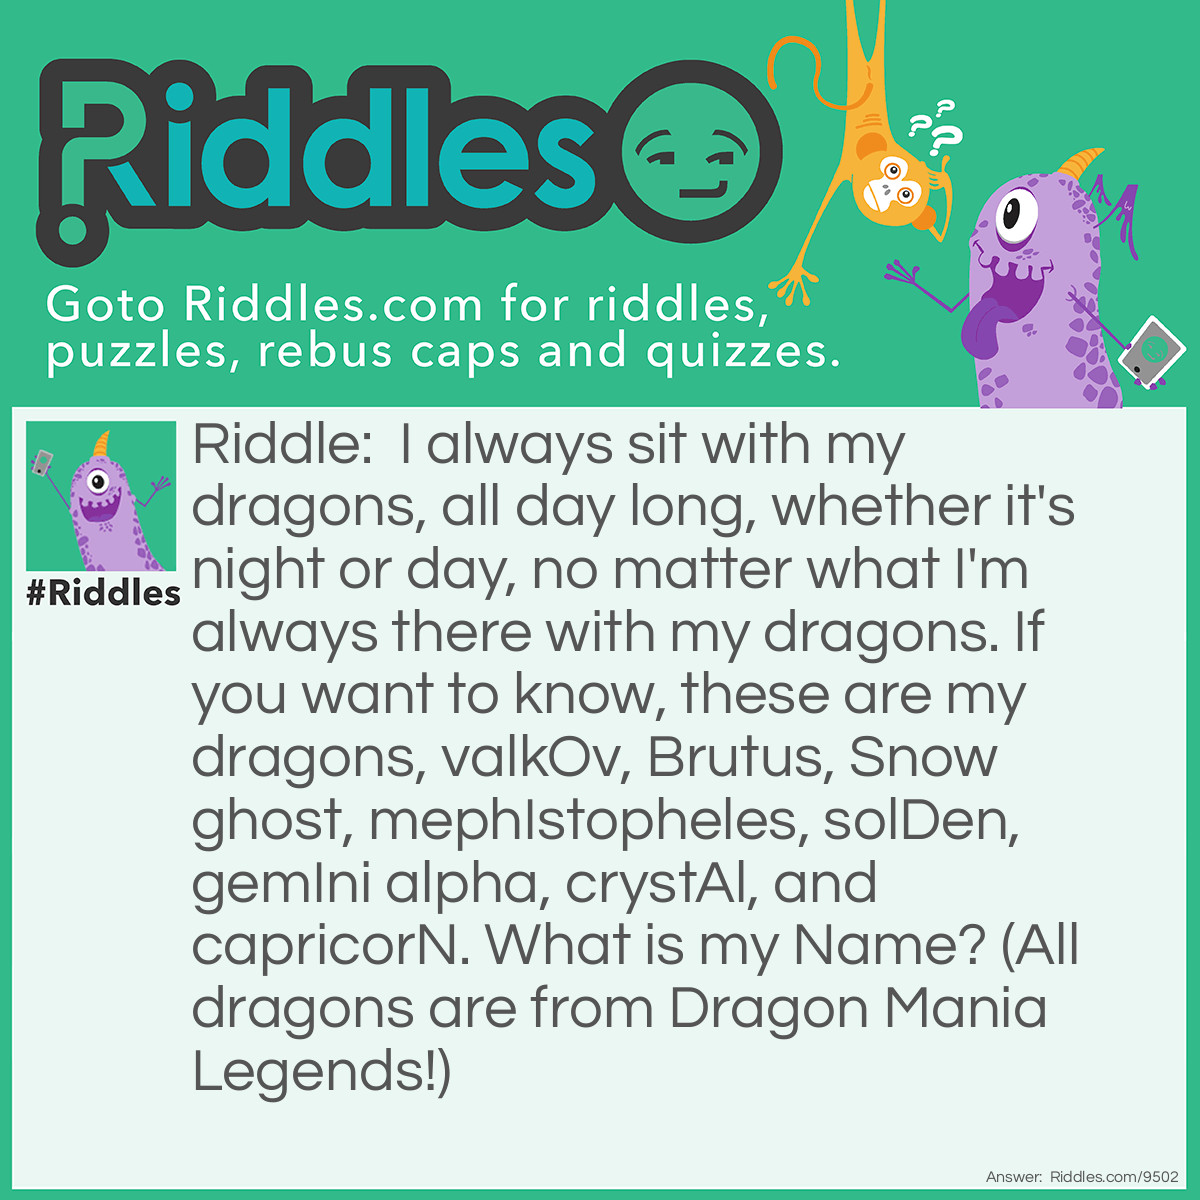 Riddle: I always sit with my dragons, all day long, whether it's night or day, no matter what I'm always there with my dragons. If you want to know, these are my dragons, valkOv, Brutus, Snow ghost, mephIstopheles, solDen, gemIni alpha, crystAl, and capricorN. What is my Name? (All dragons are from Dragon Mania Legends!) Answer: Obsidian! (Every dragon name has a random uppercase letter, putting all the uppercase letters together spells "Obsidian")